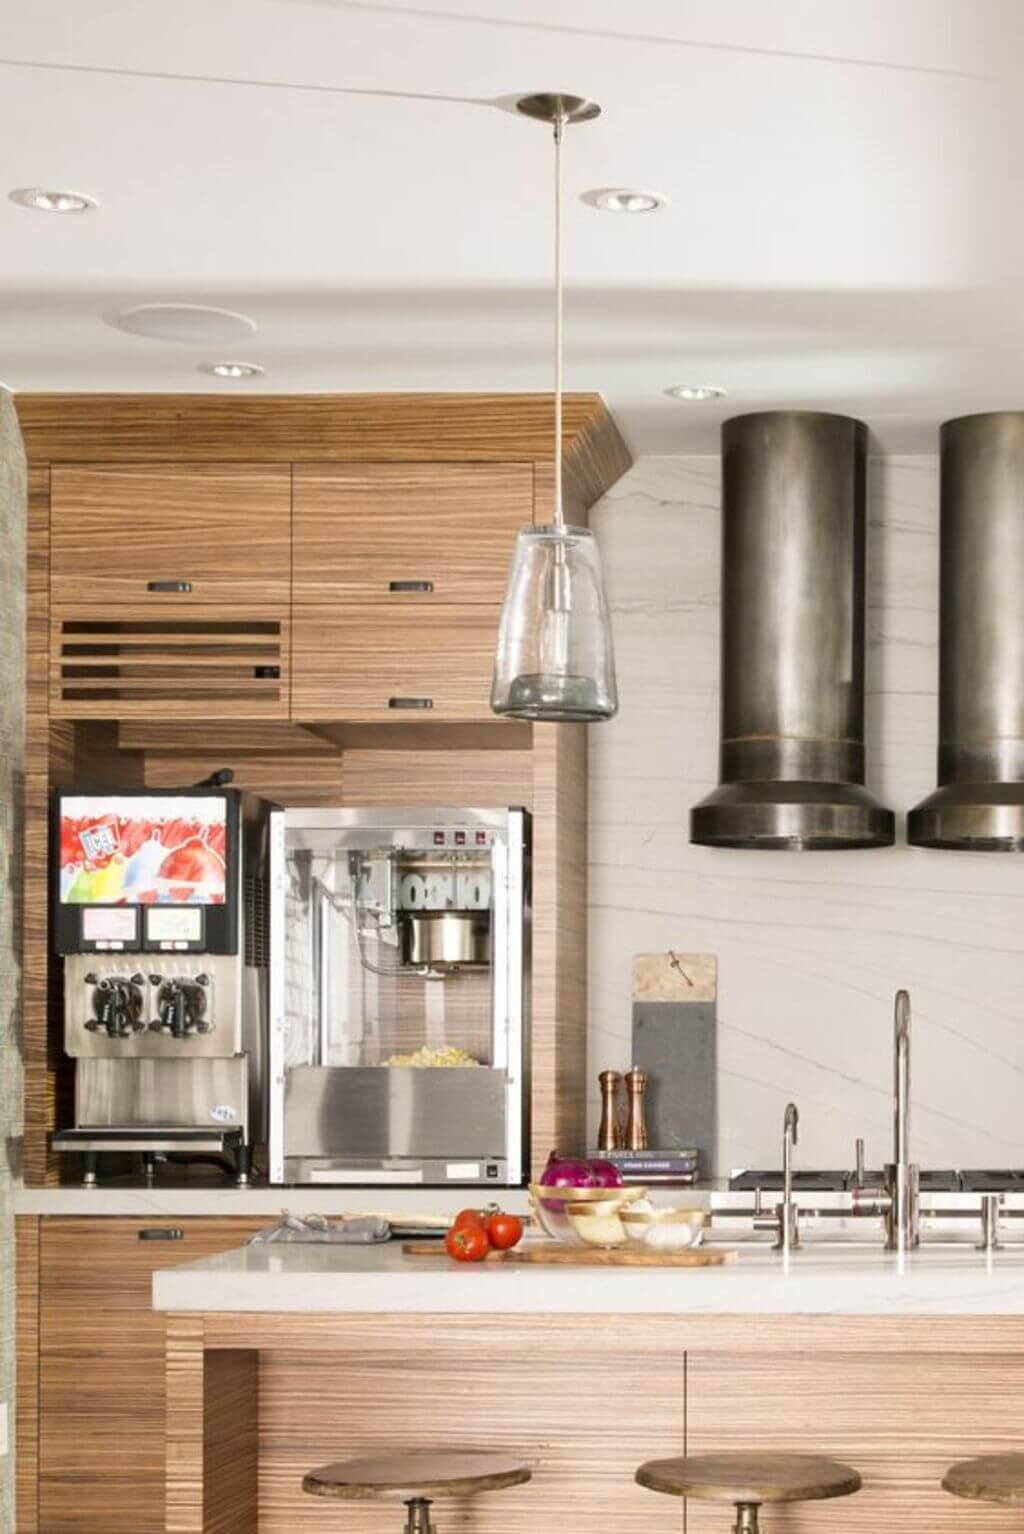 A kitchen with a stove, refrigerator, and stools
